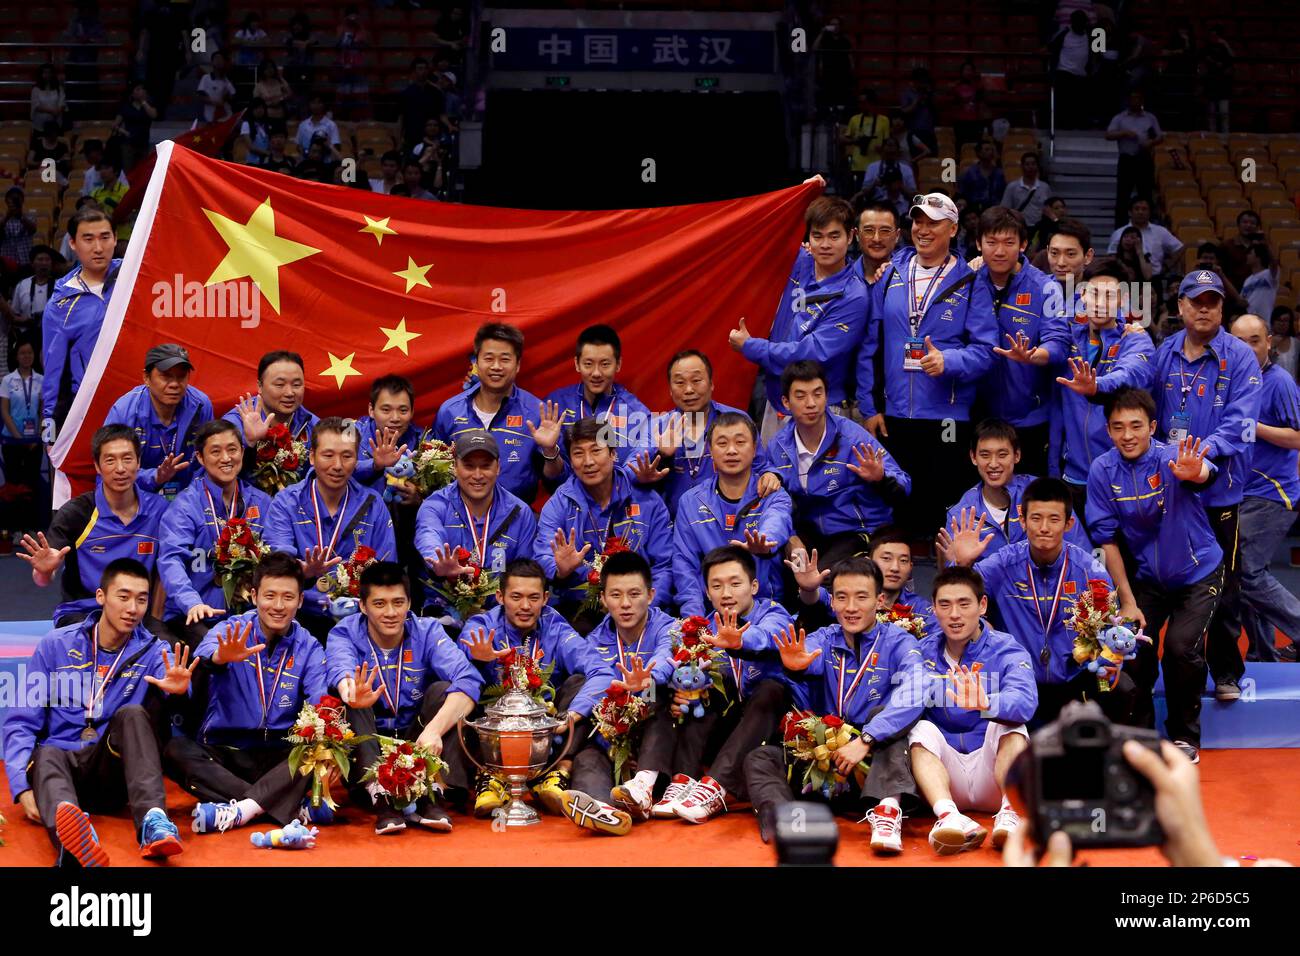 Chinese players pose for a group picture after winning the Thomas Cup badminton championship in Wuhan in central Chinas Hubei province on Sunday, May 27, 2012